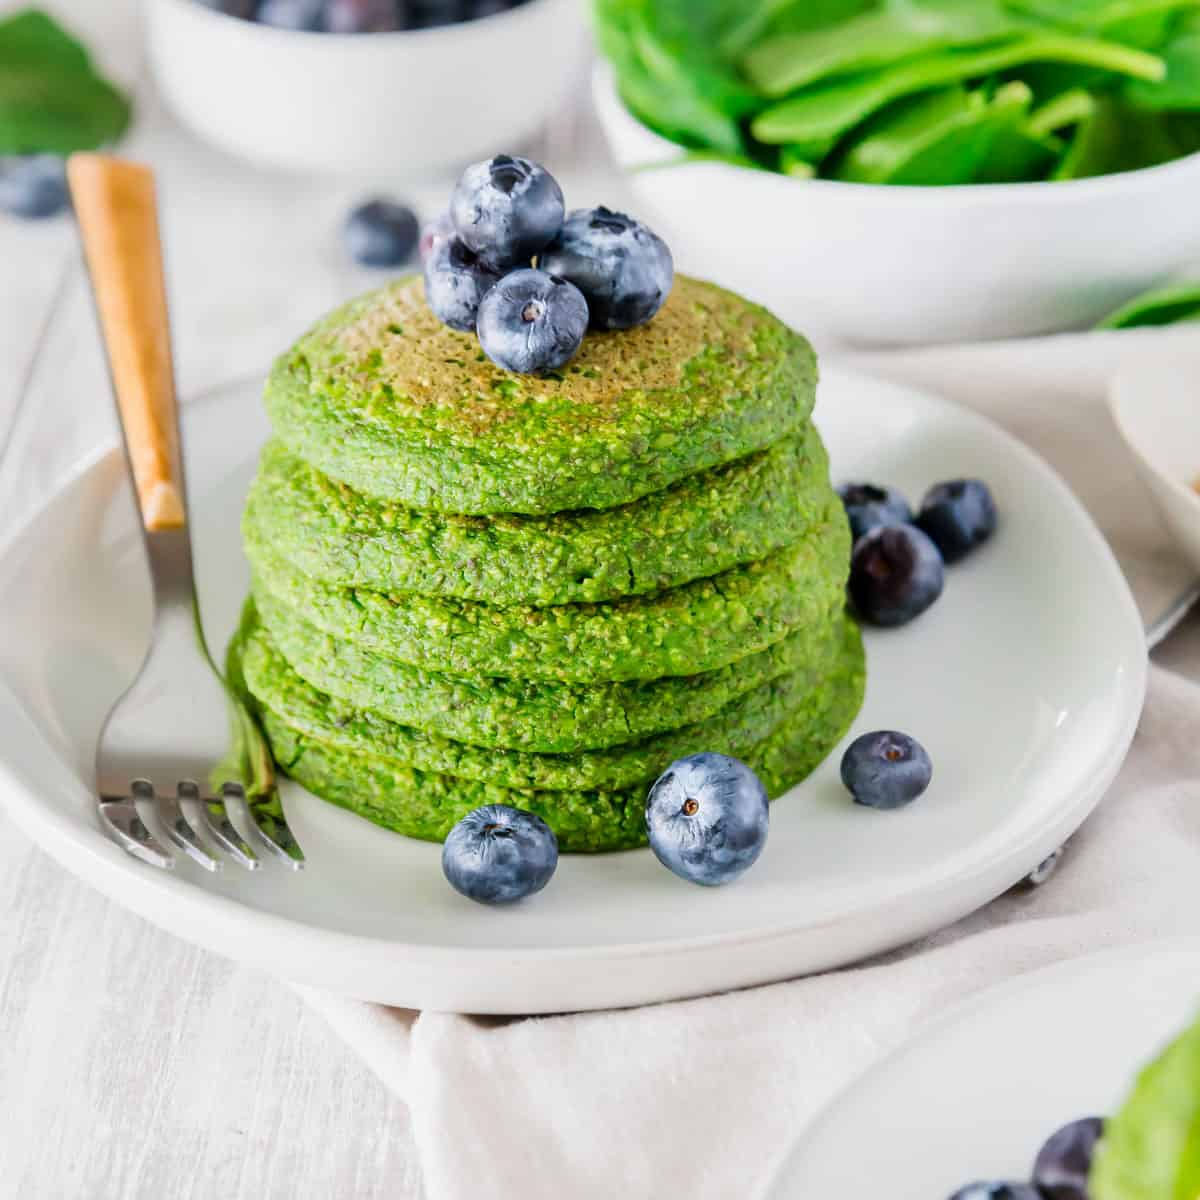 Enjoy a stack of these gluten-free and vegan green spinach pancakes for St. Patrick's Day!